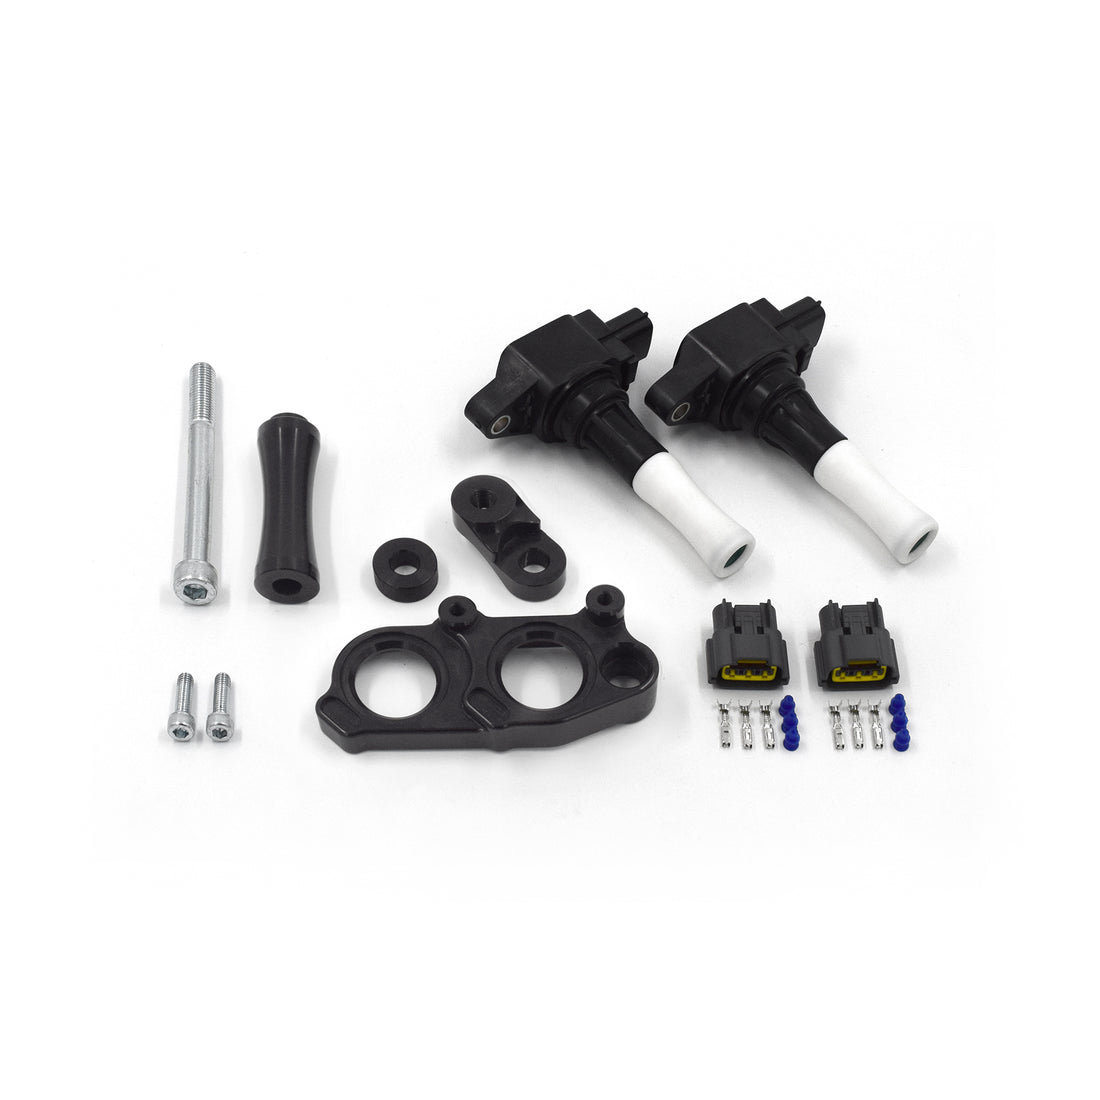 VR38 Coil Kit for Mazda Rotary Engines